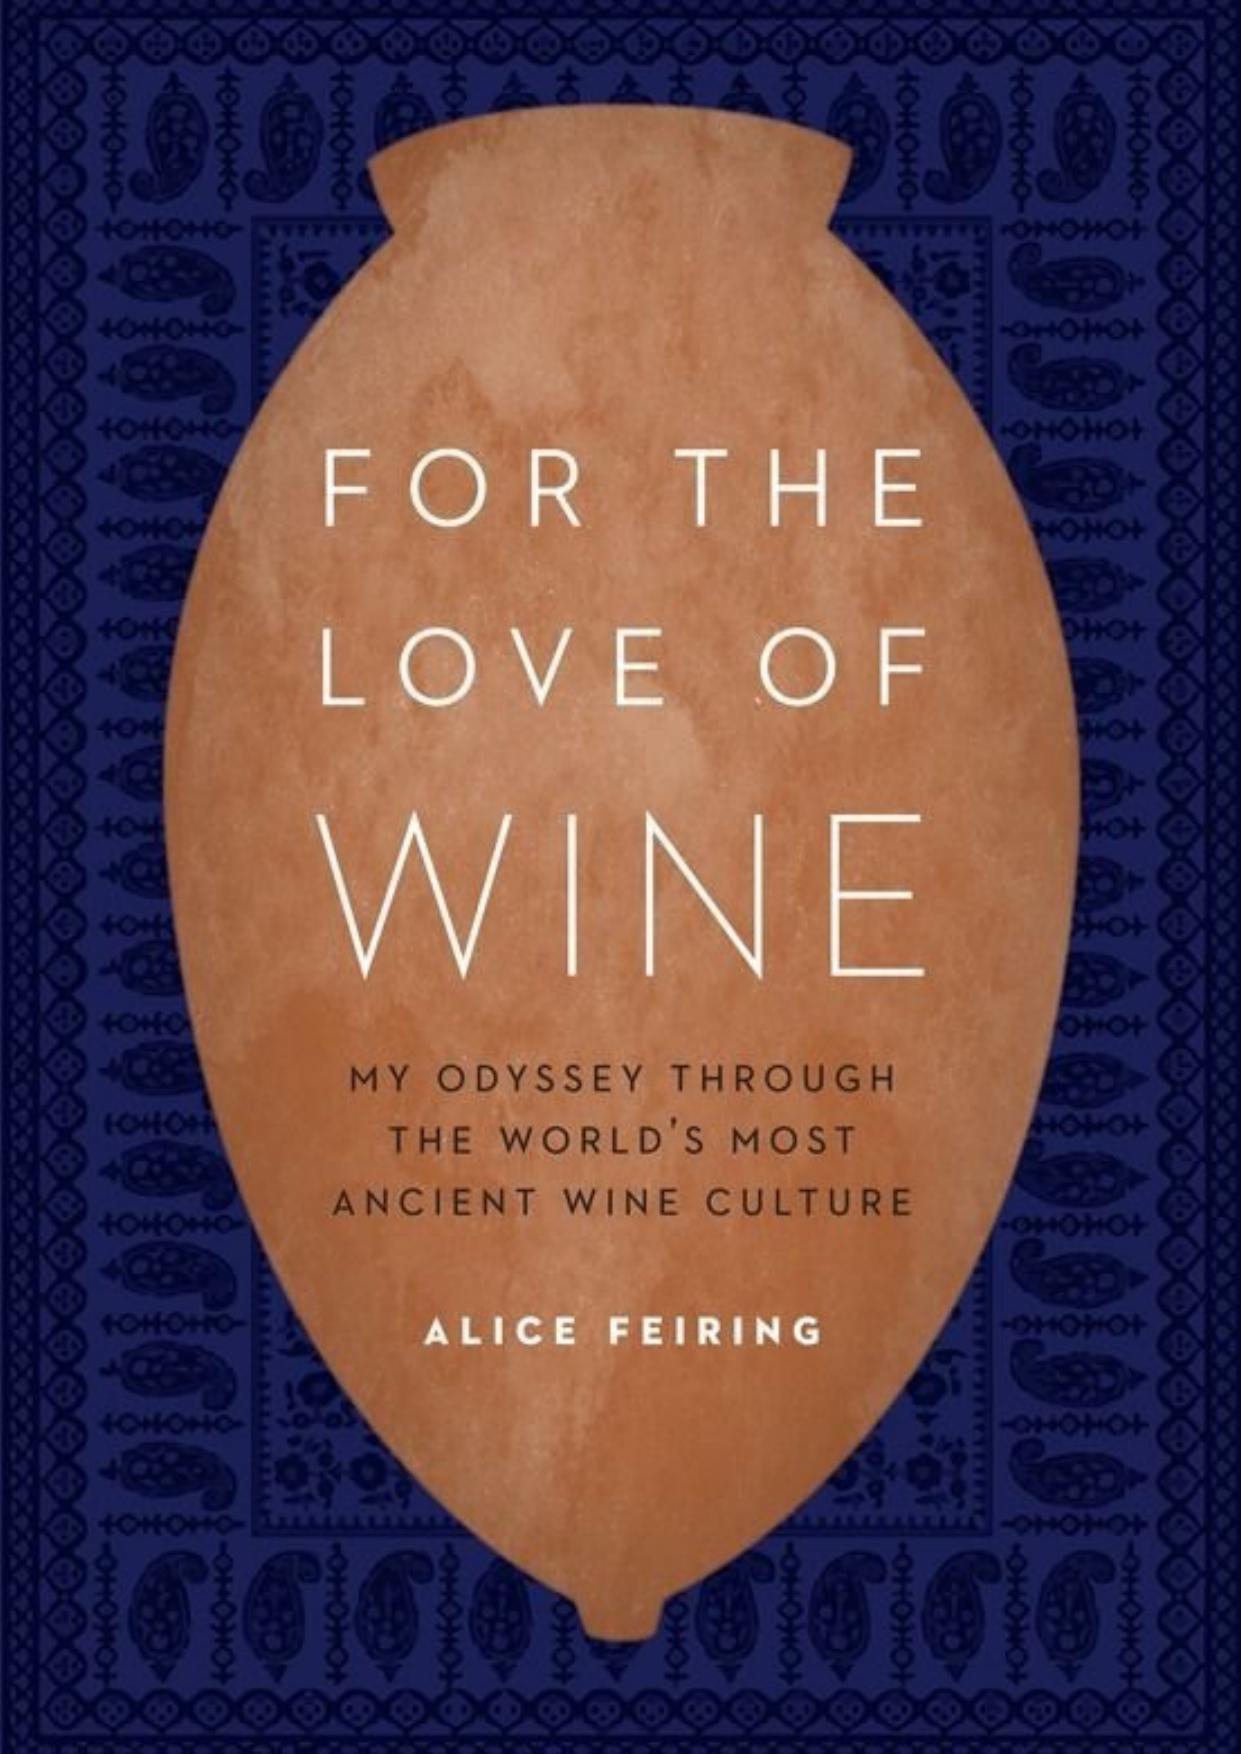 For the Love of Wine: My Odyssey through the World's Most Ancient Wine Culture by Alice Feiring